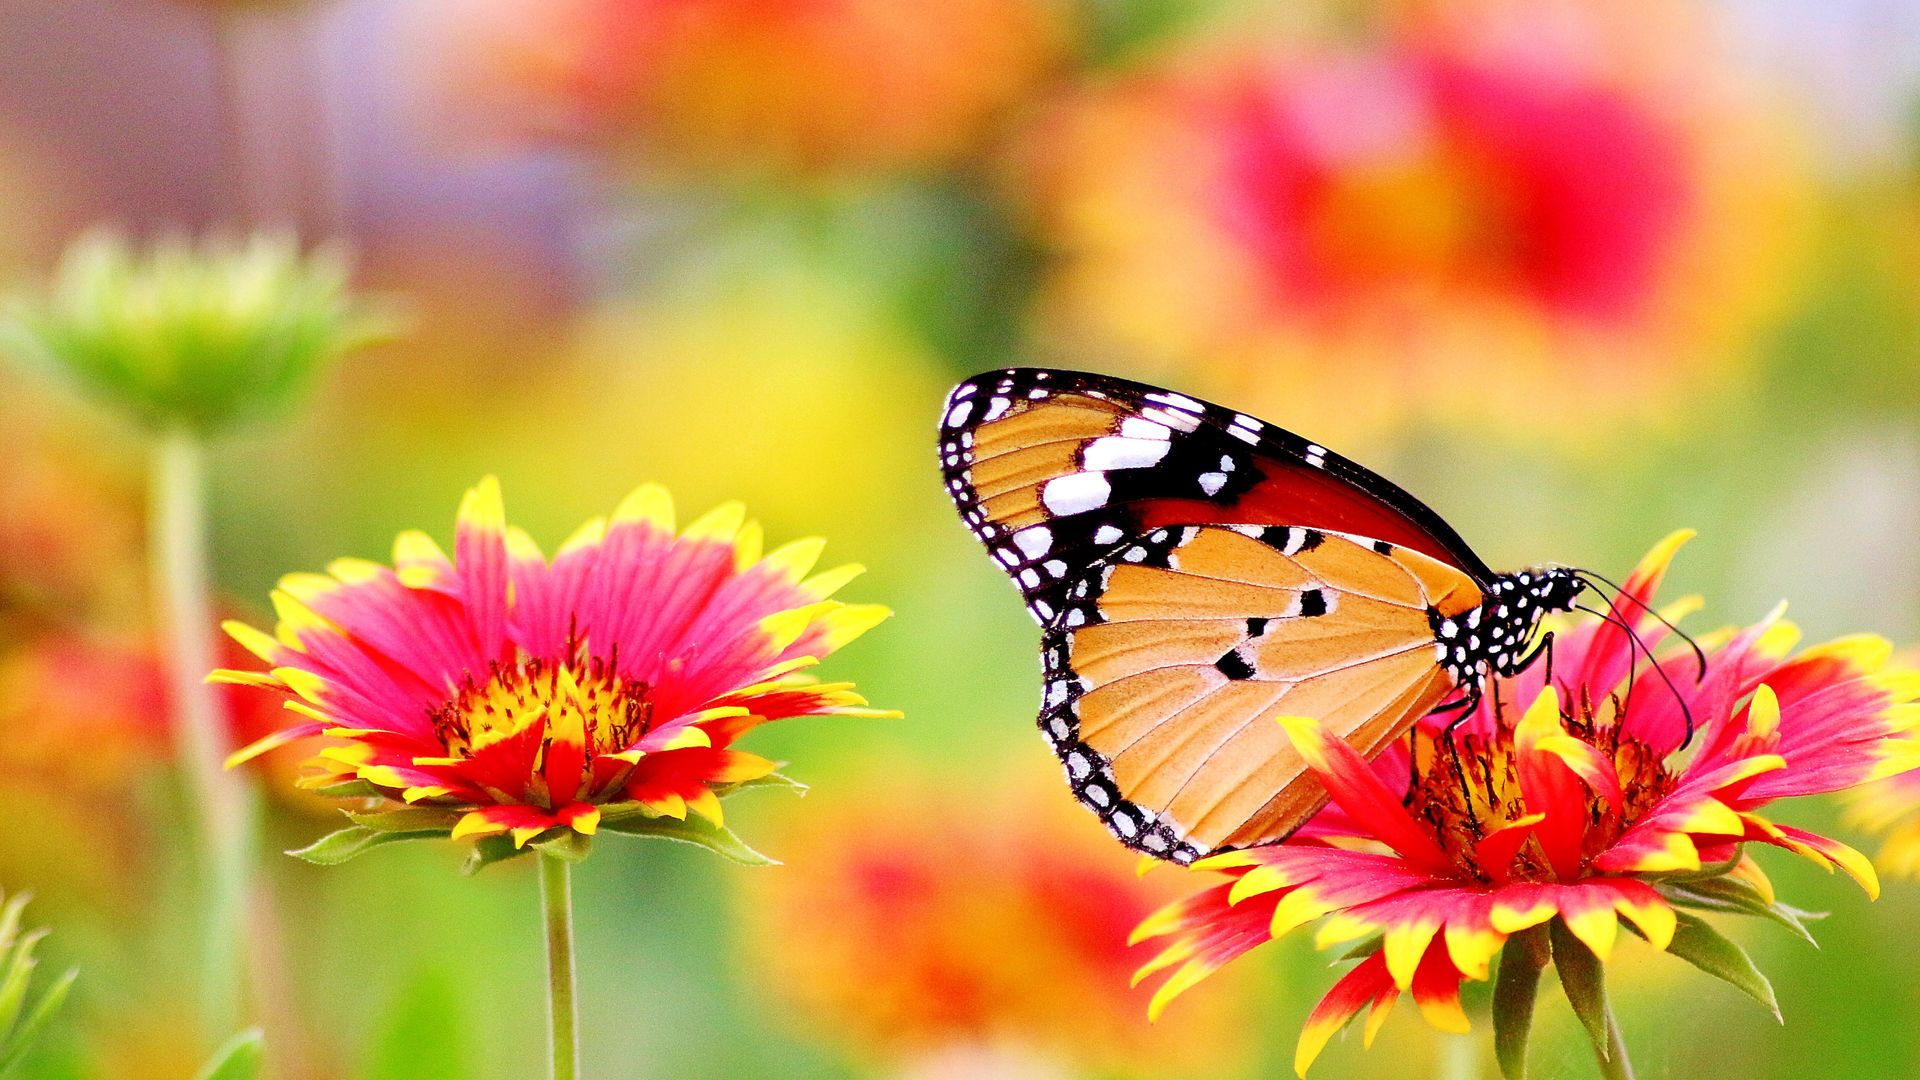 colorful wallpaper,butterfly,monarch butterfly,cynthia (subgenus),insect,moths and butterflies